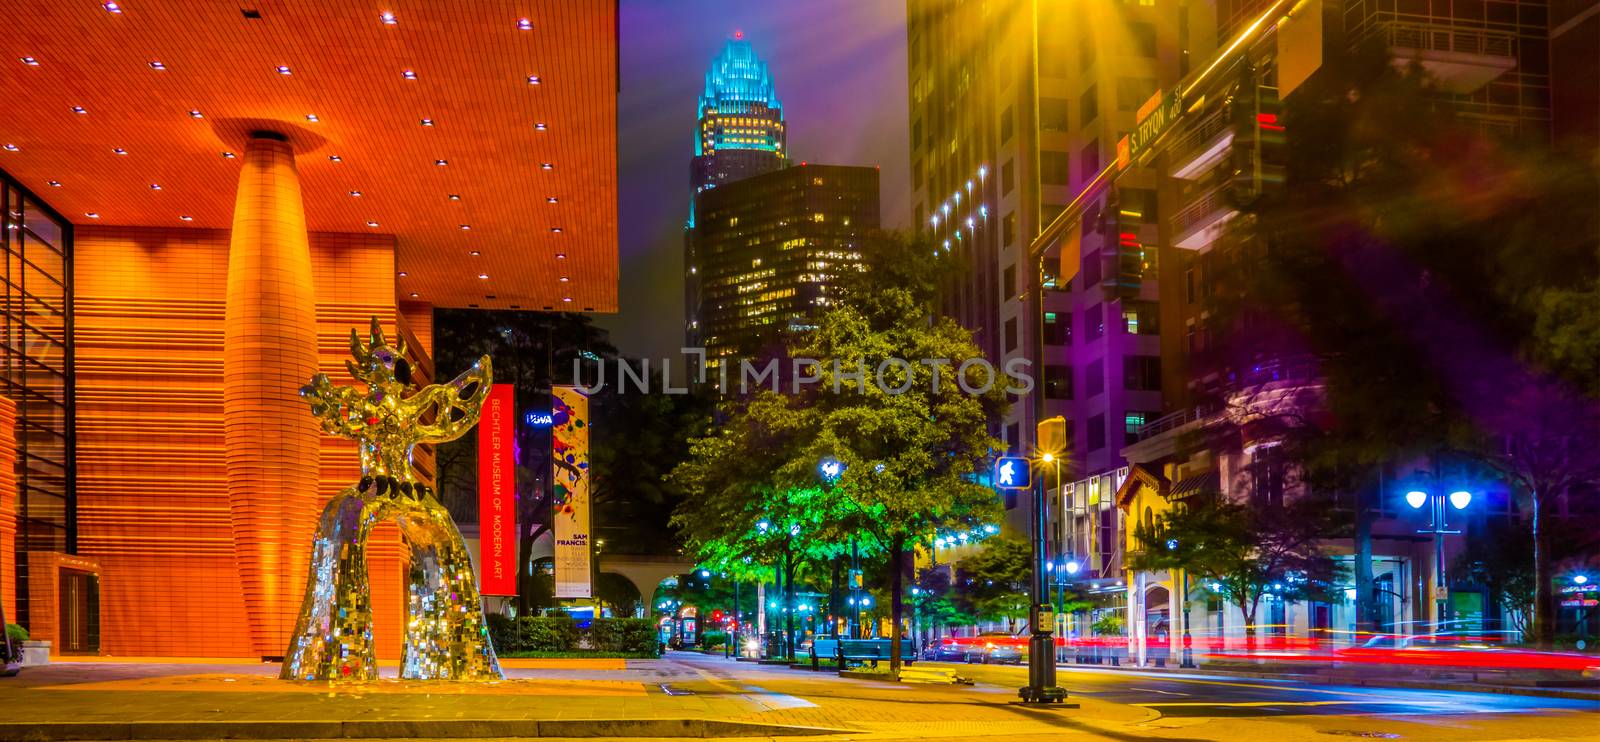 night time on streets of charlotte north carolina by digidreamgrafix